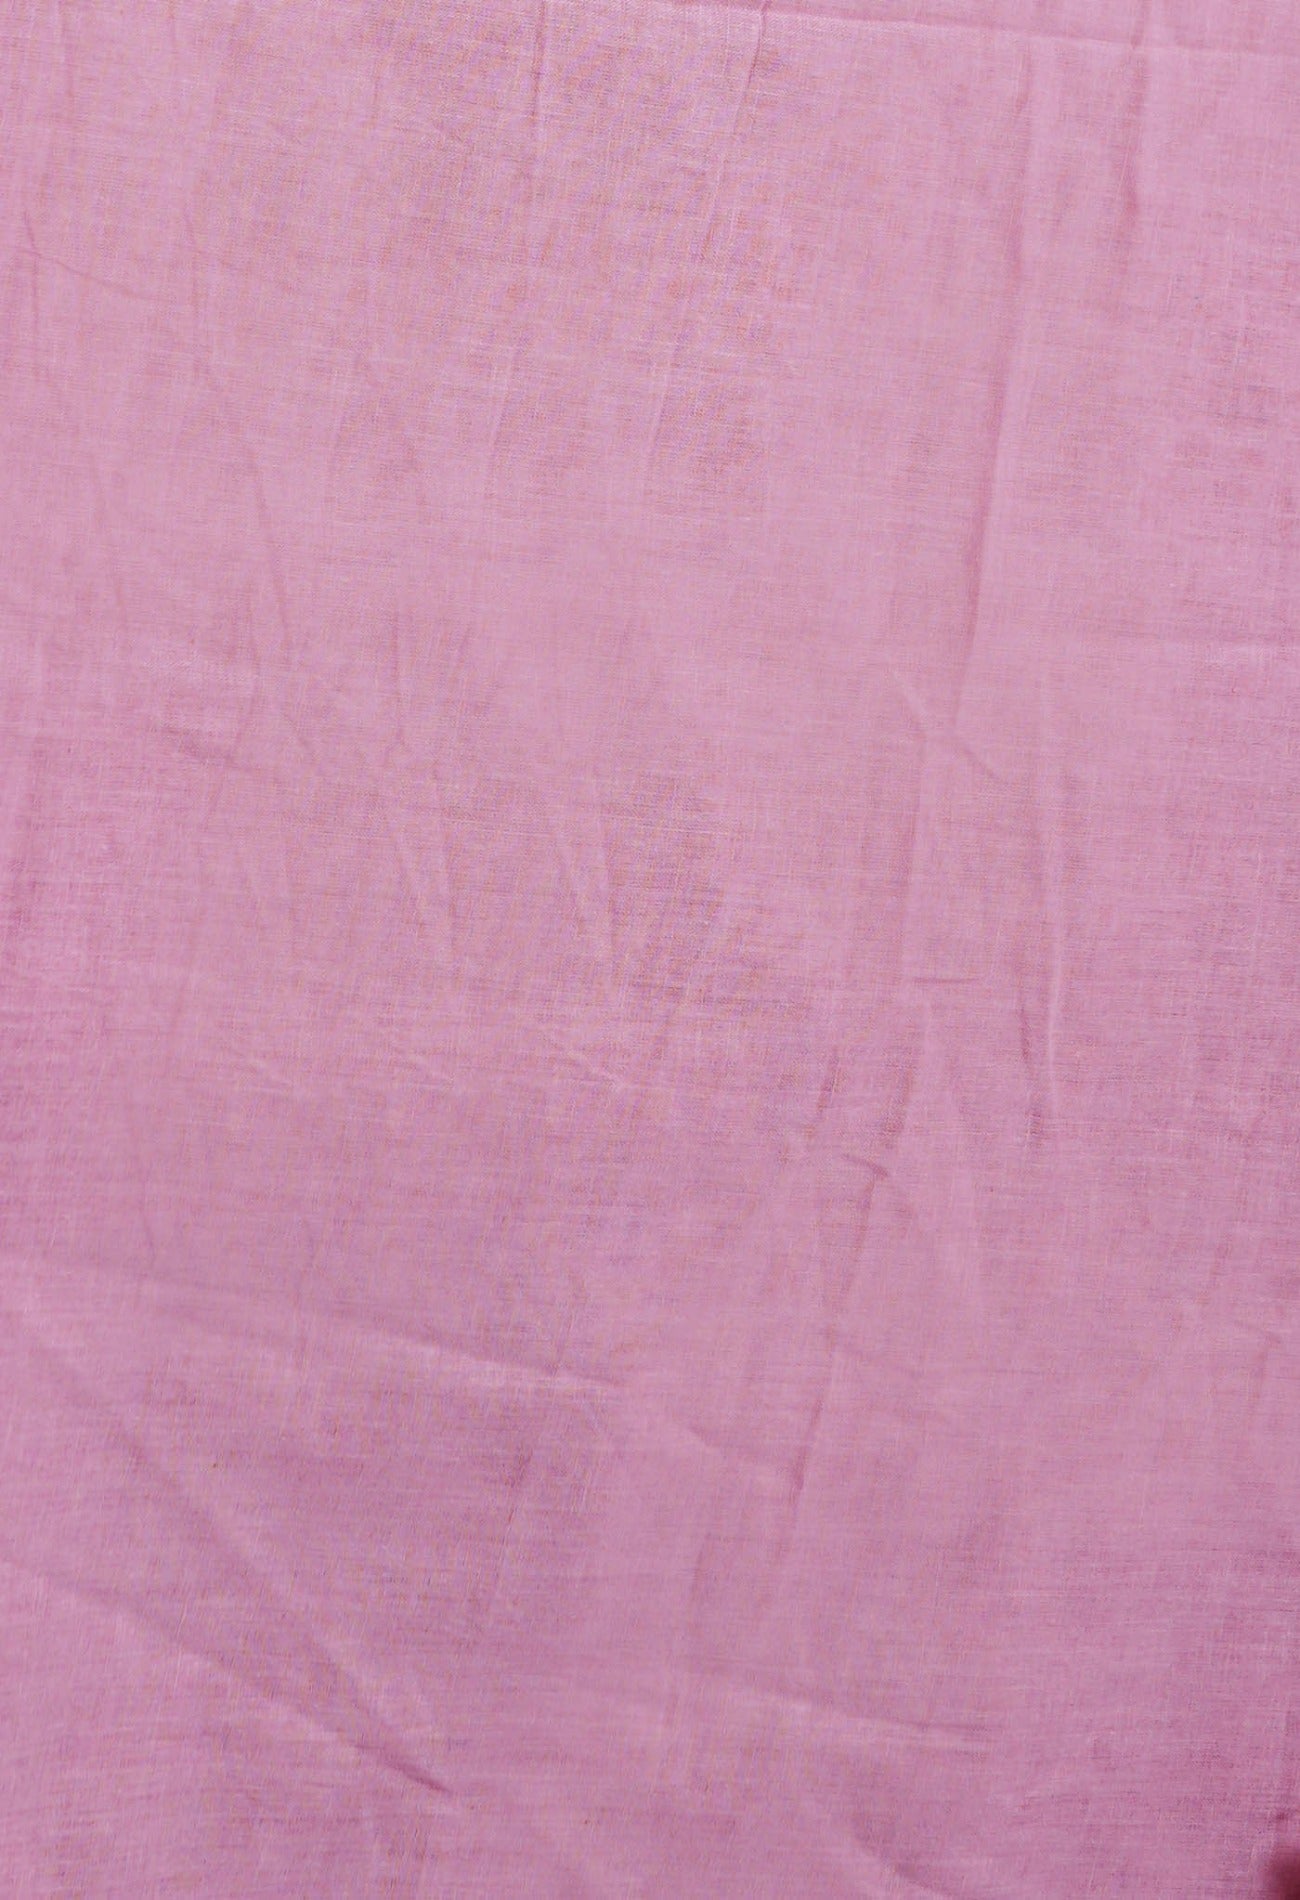 Online Shopping for Pink Pure Block Printed Mulmul Cotton Saree with Hand Block Prints from Rajasthan at Unnatisilks.com India
